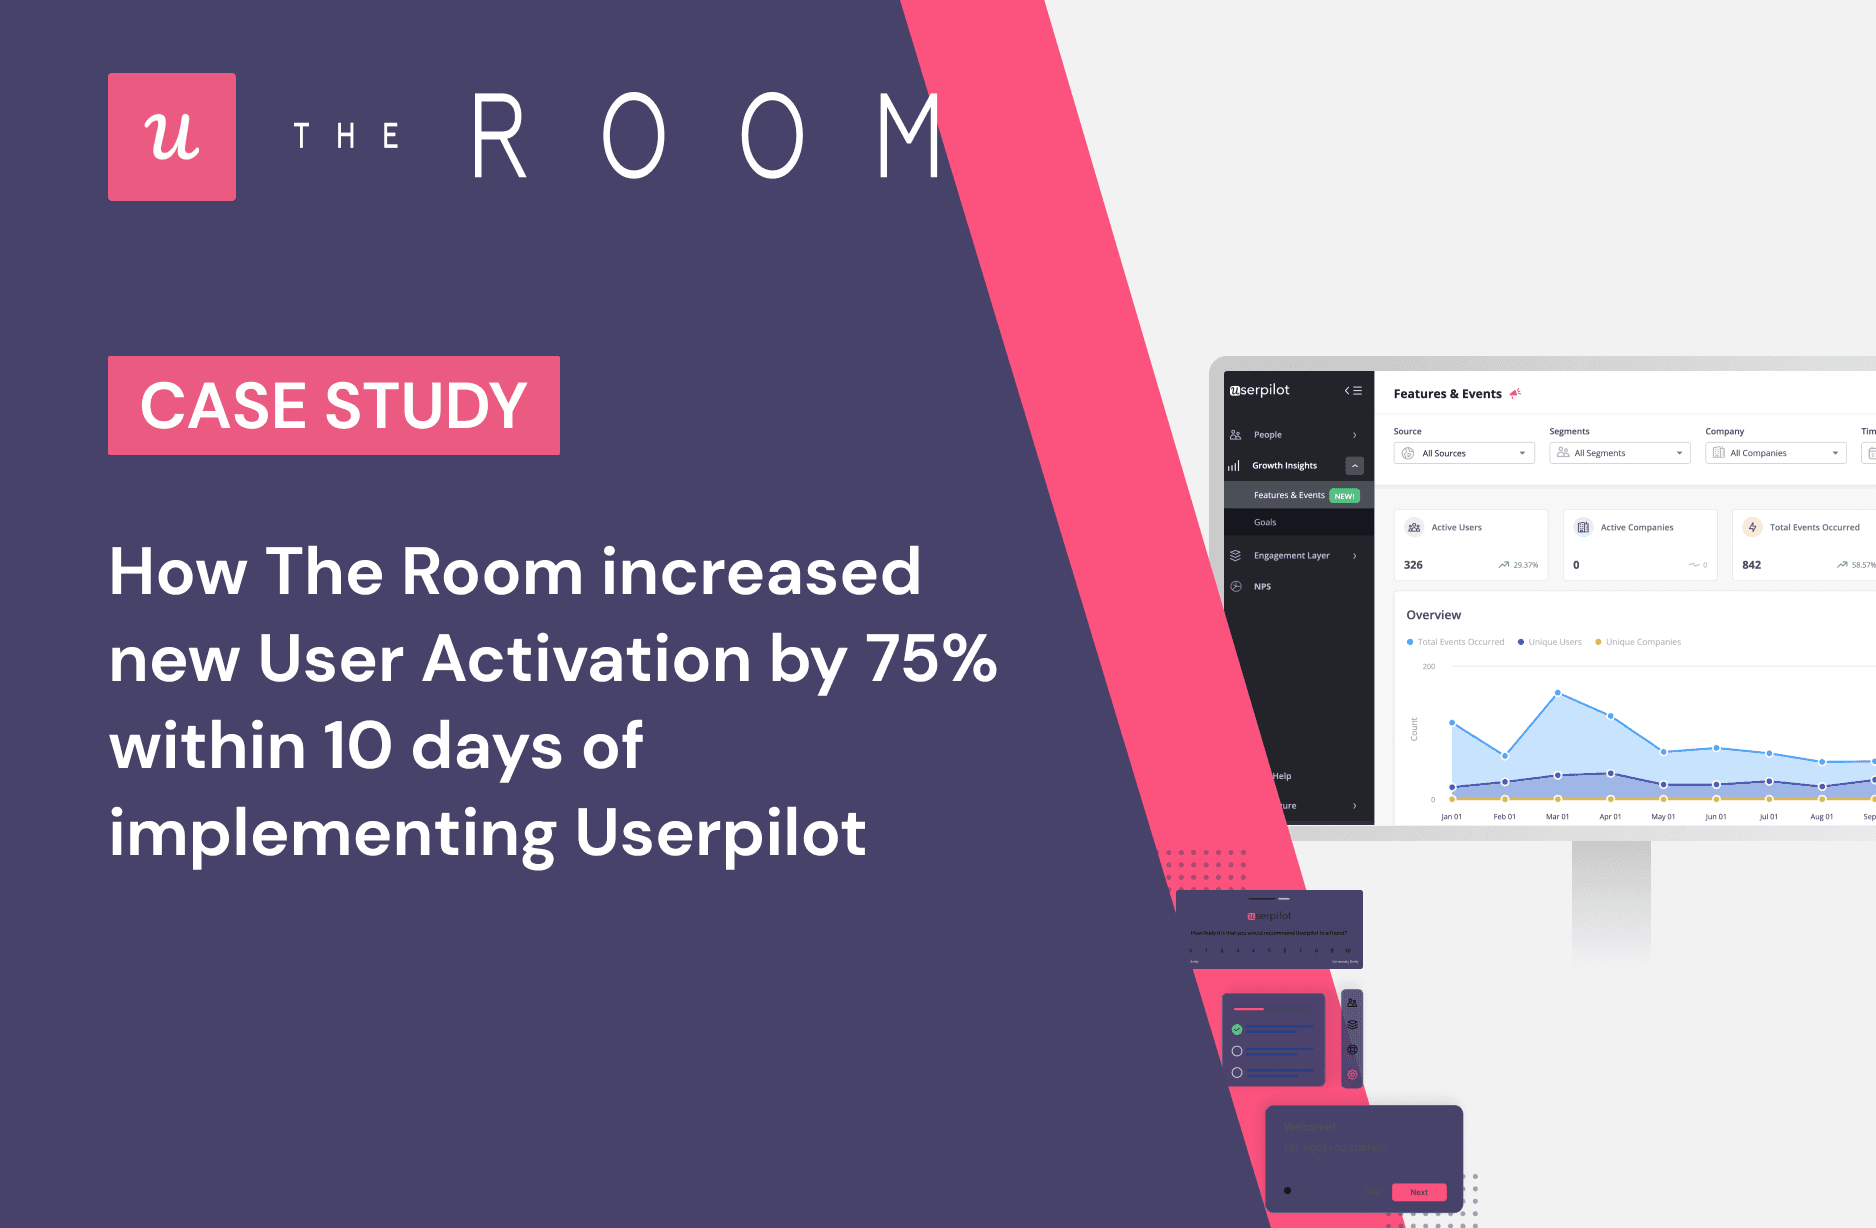 [CASE STUDY] How The Room increased new User Activation by 75% within 10 days of implementing Userpilot cover